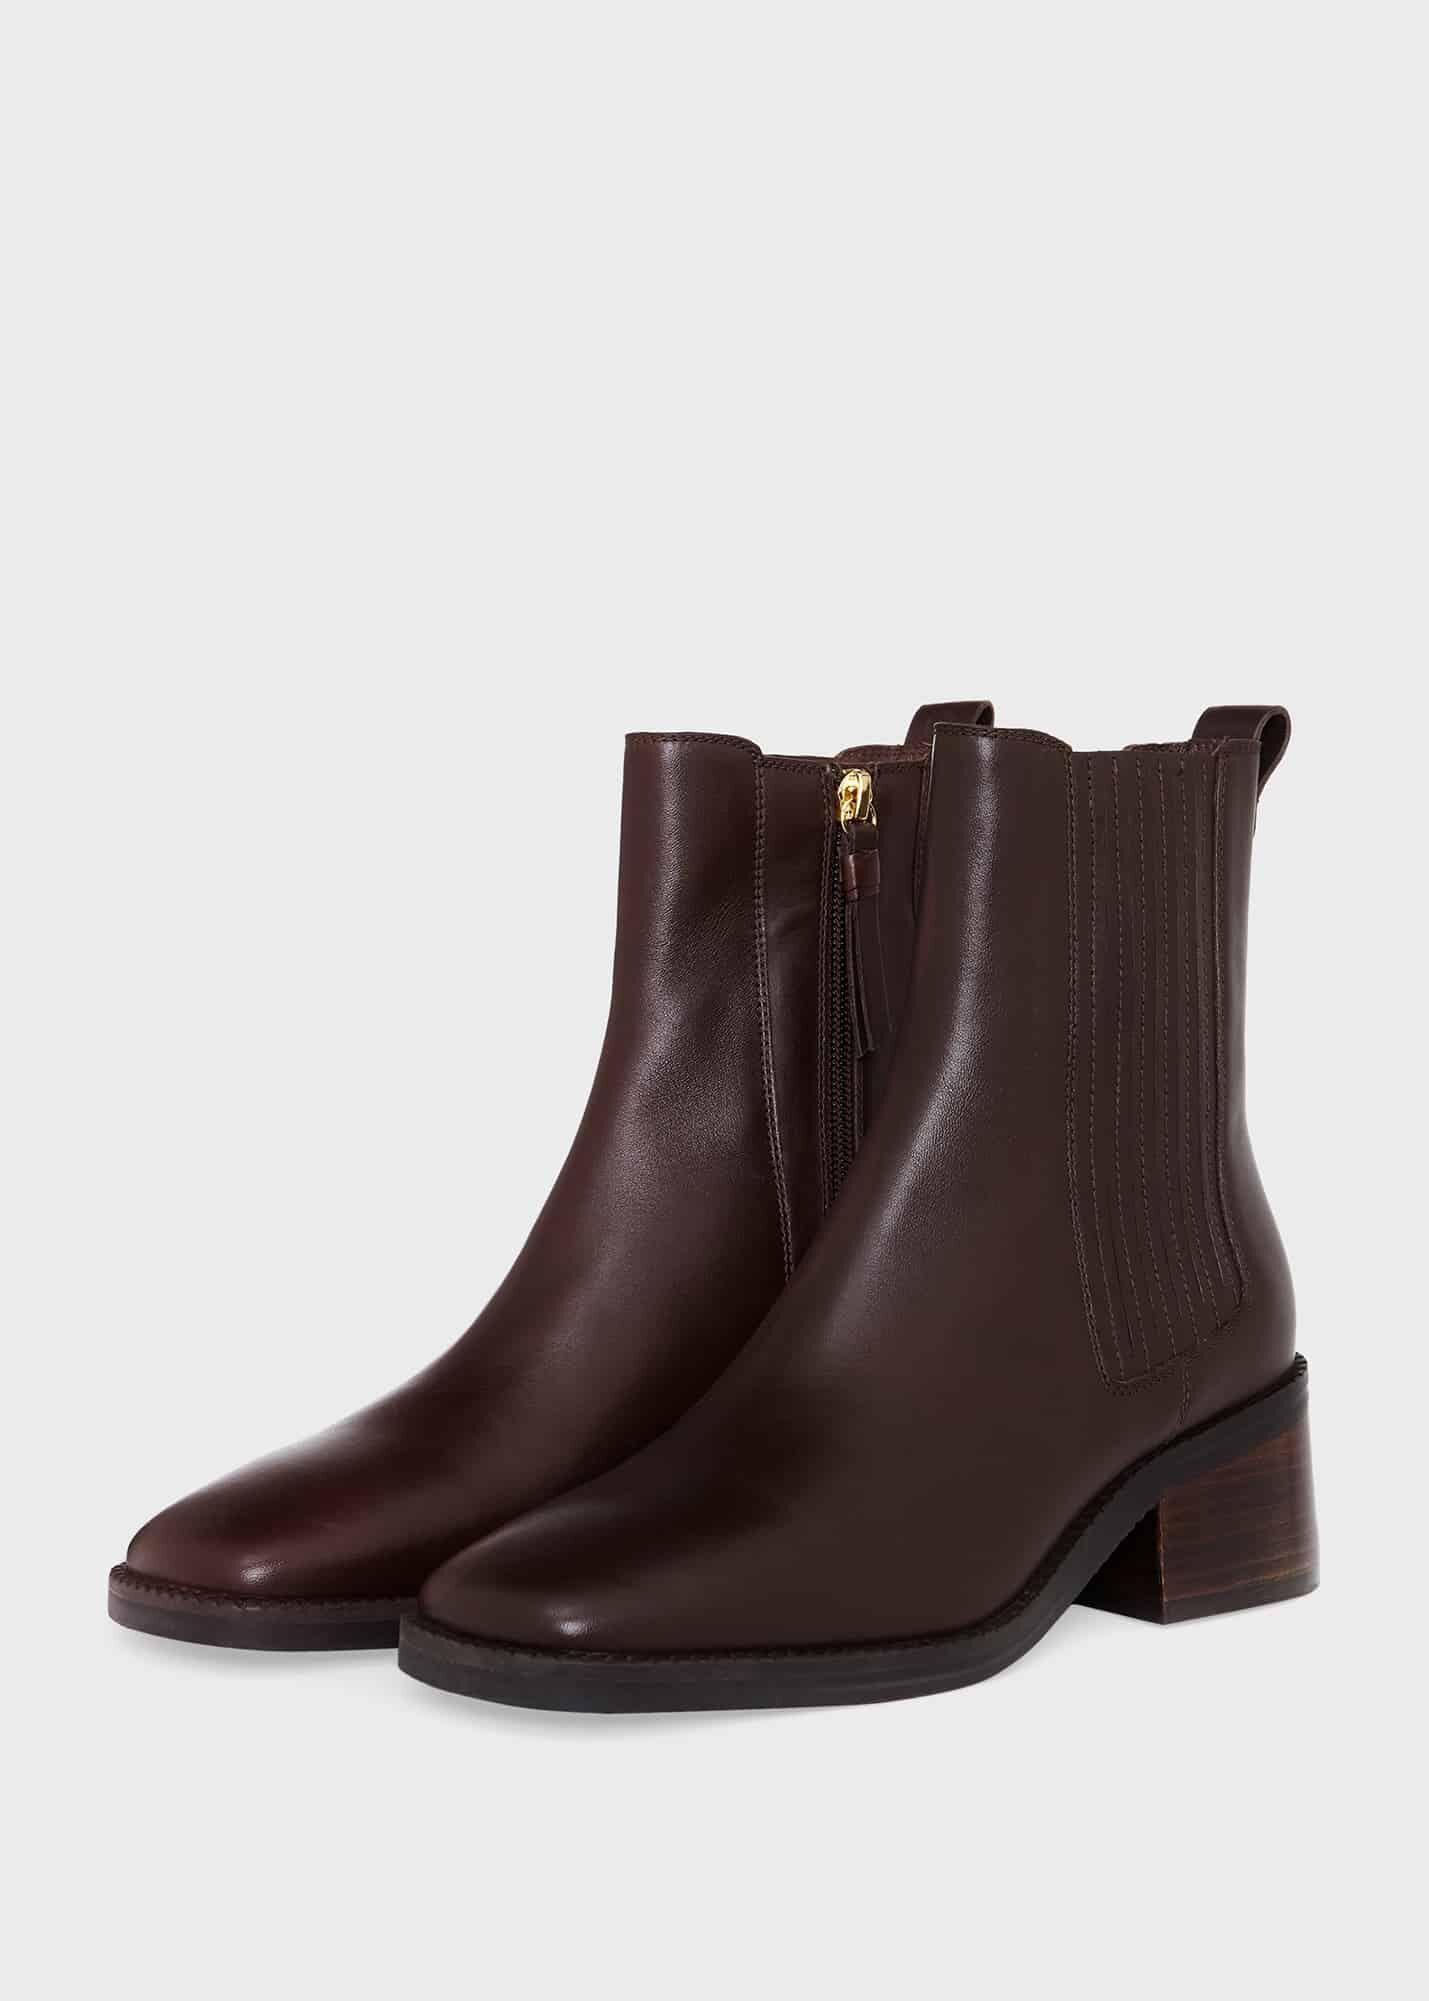 Hobbs Fran Ankle Boots in Brown | Lyst